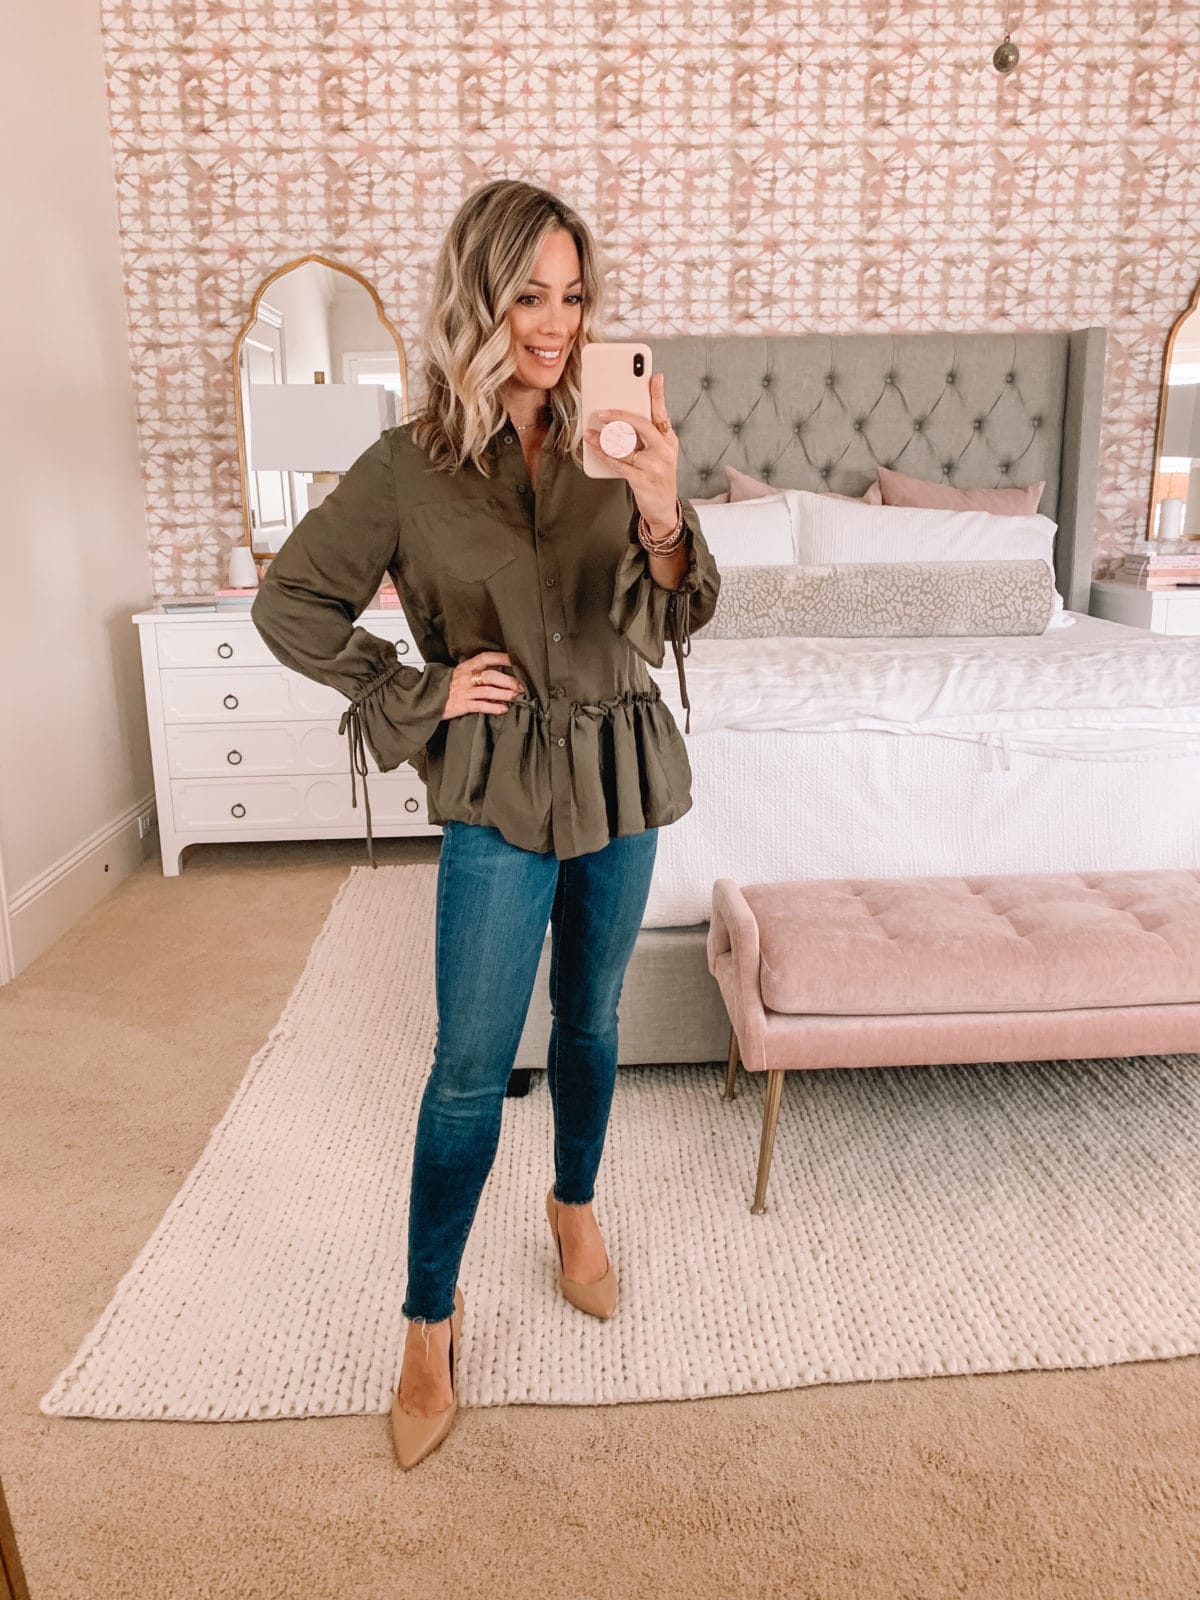 Amazon Fashion Faves, relaxed Peplum Top, Jeans, Heels